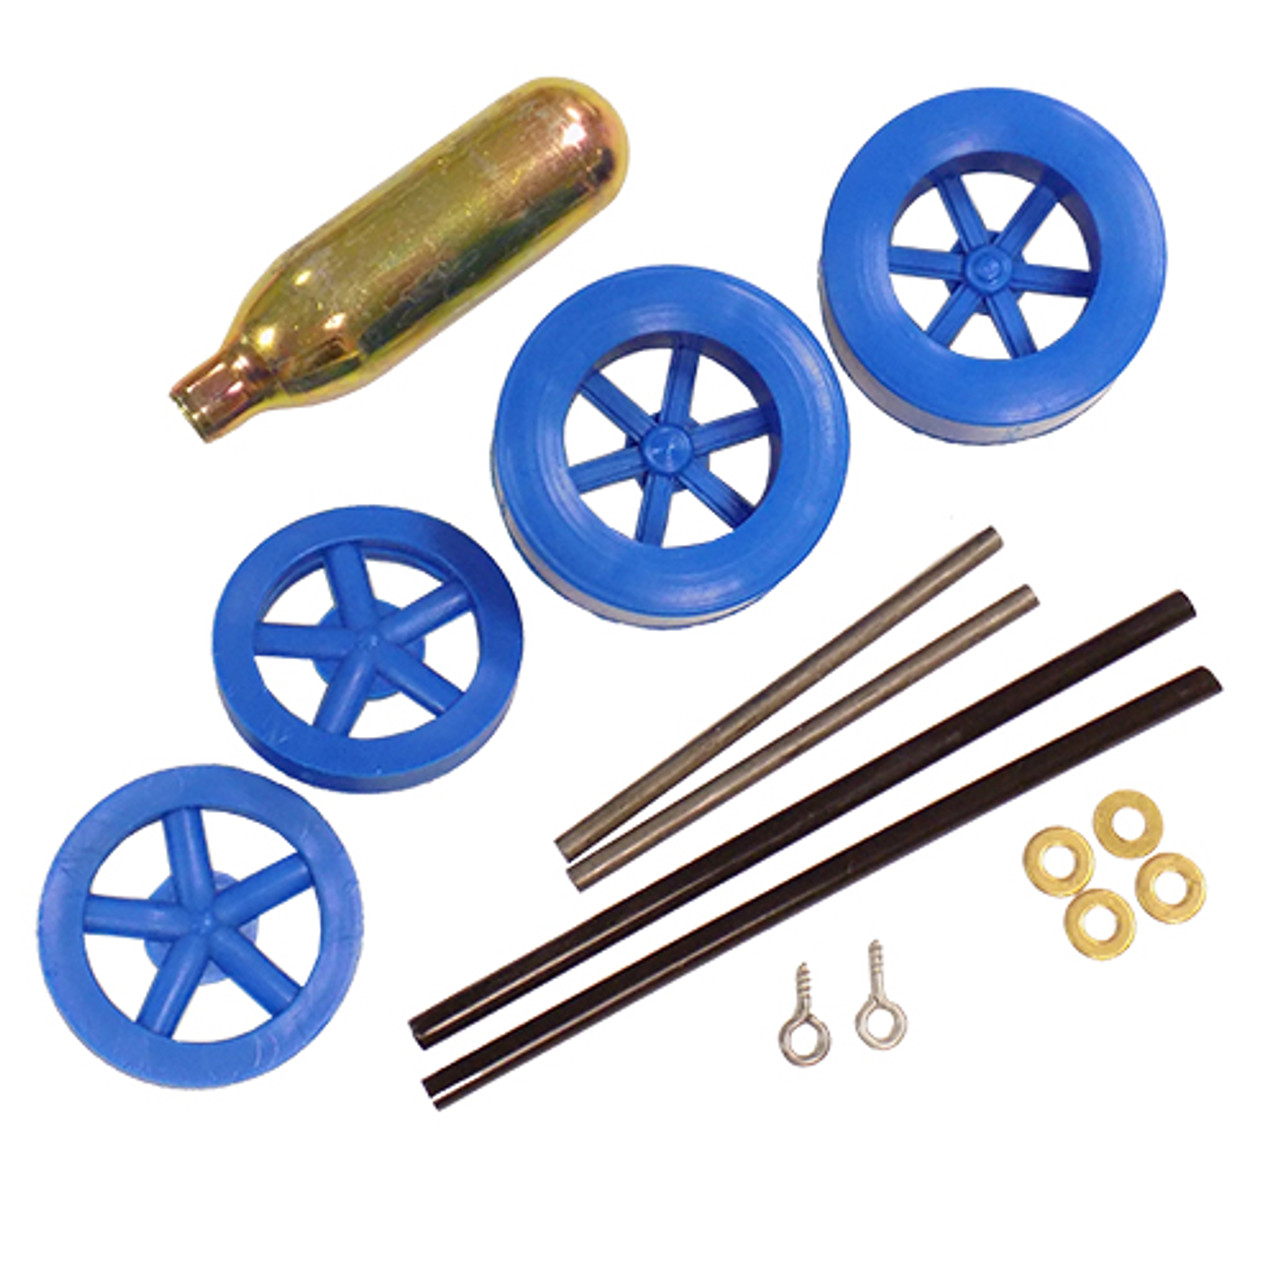 ABS Dragster Wheel Kit with CO2 Cartridge, Blue